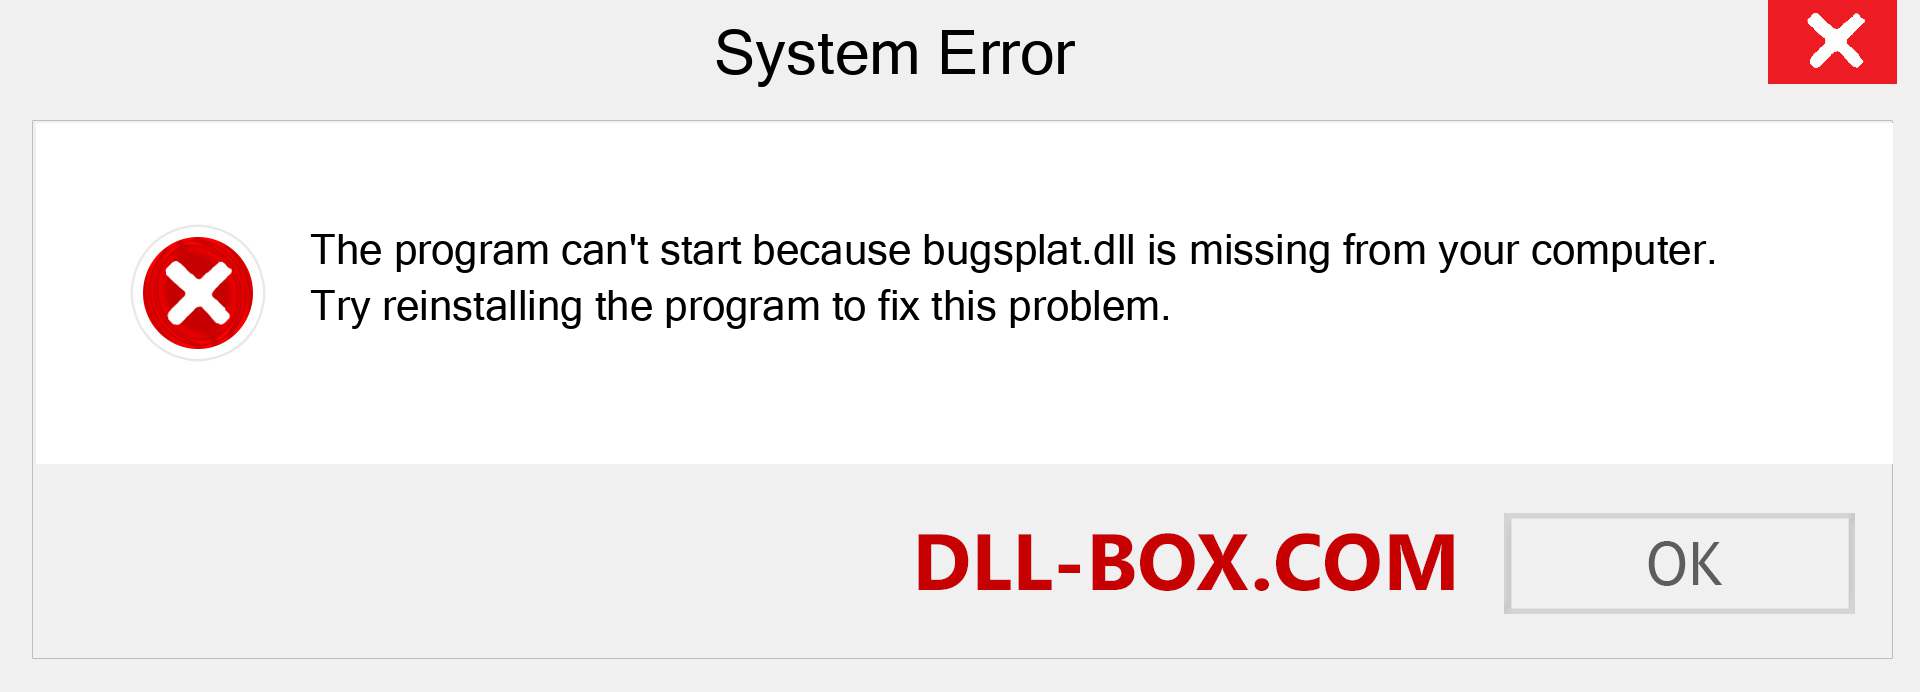  bugsplat.dll file is missing?. Download for Windows 7, 8, 10 - Fix  bugsplat dll Missing Error on Windows, photos, images